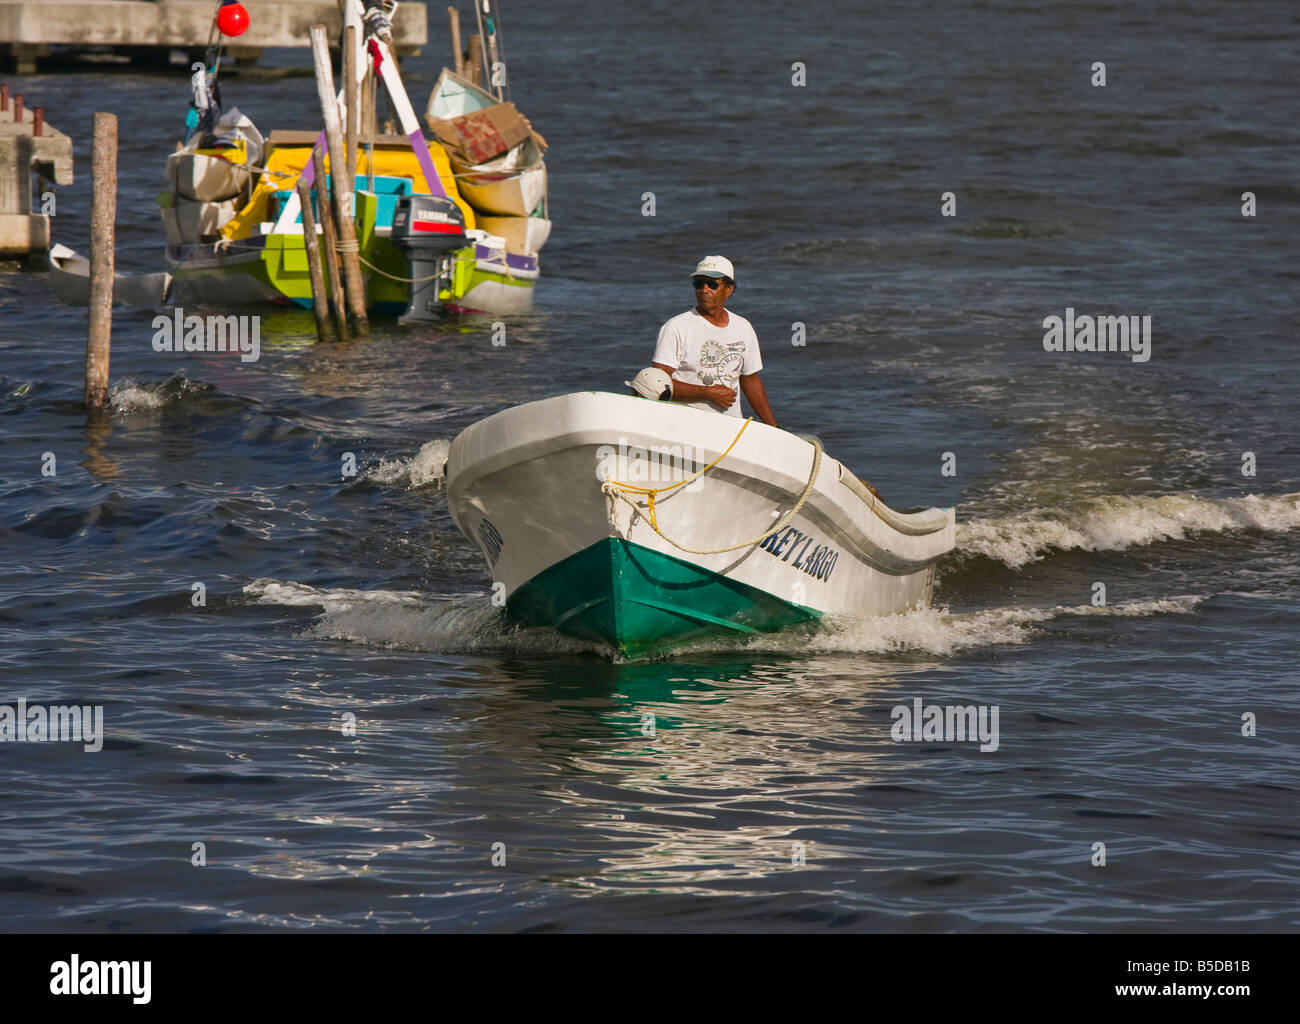 BELIZE CITY BELIZE Man pilots small boat in Belize Harbor at the mouth of Haulover Creek Stock Photo